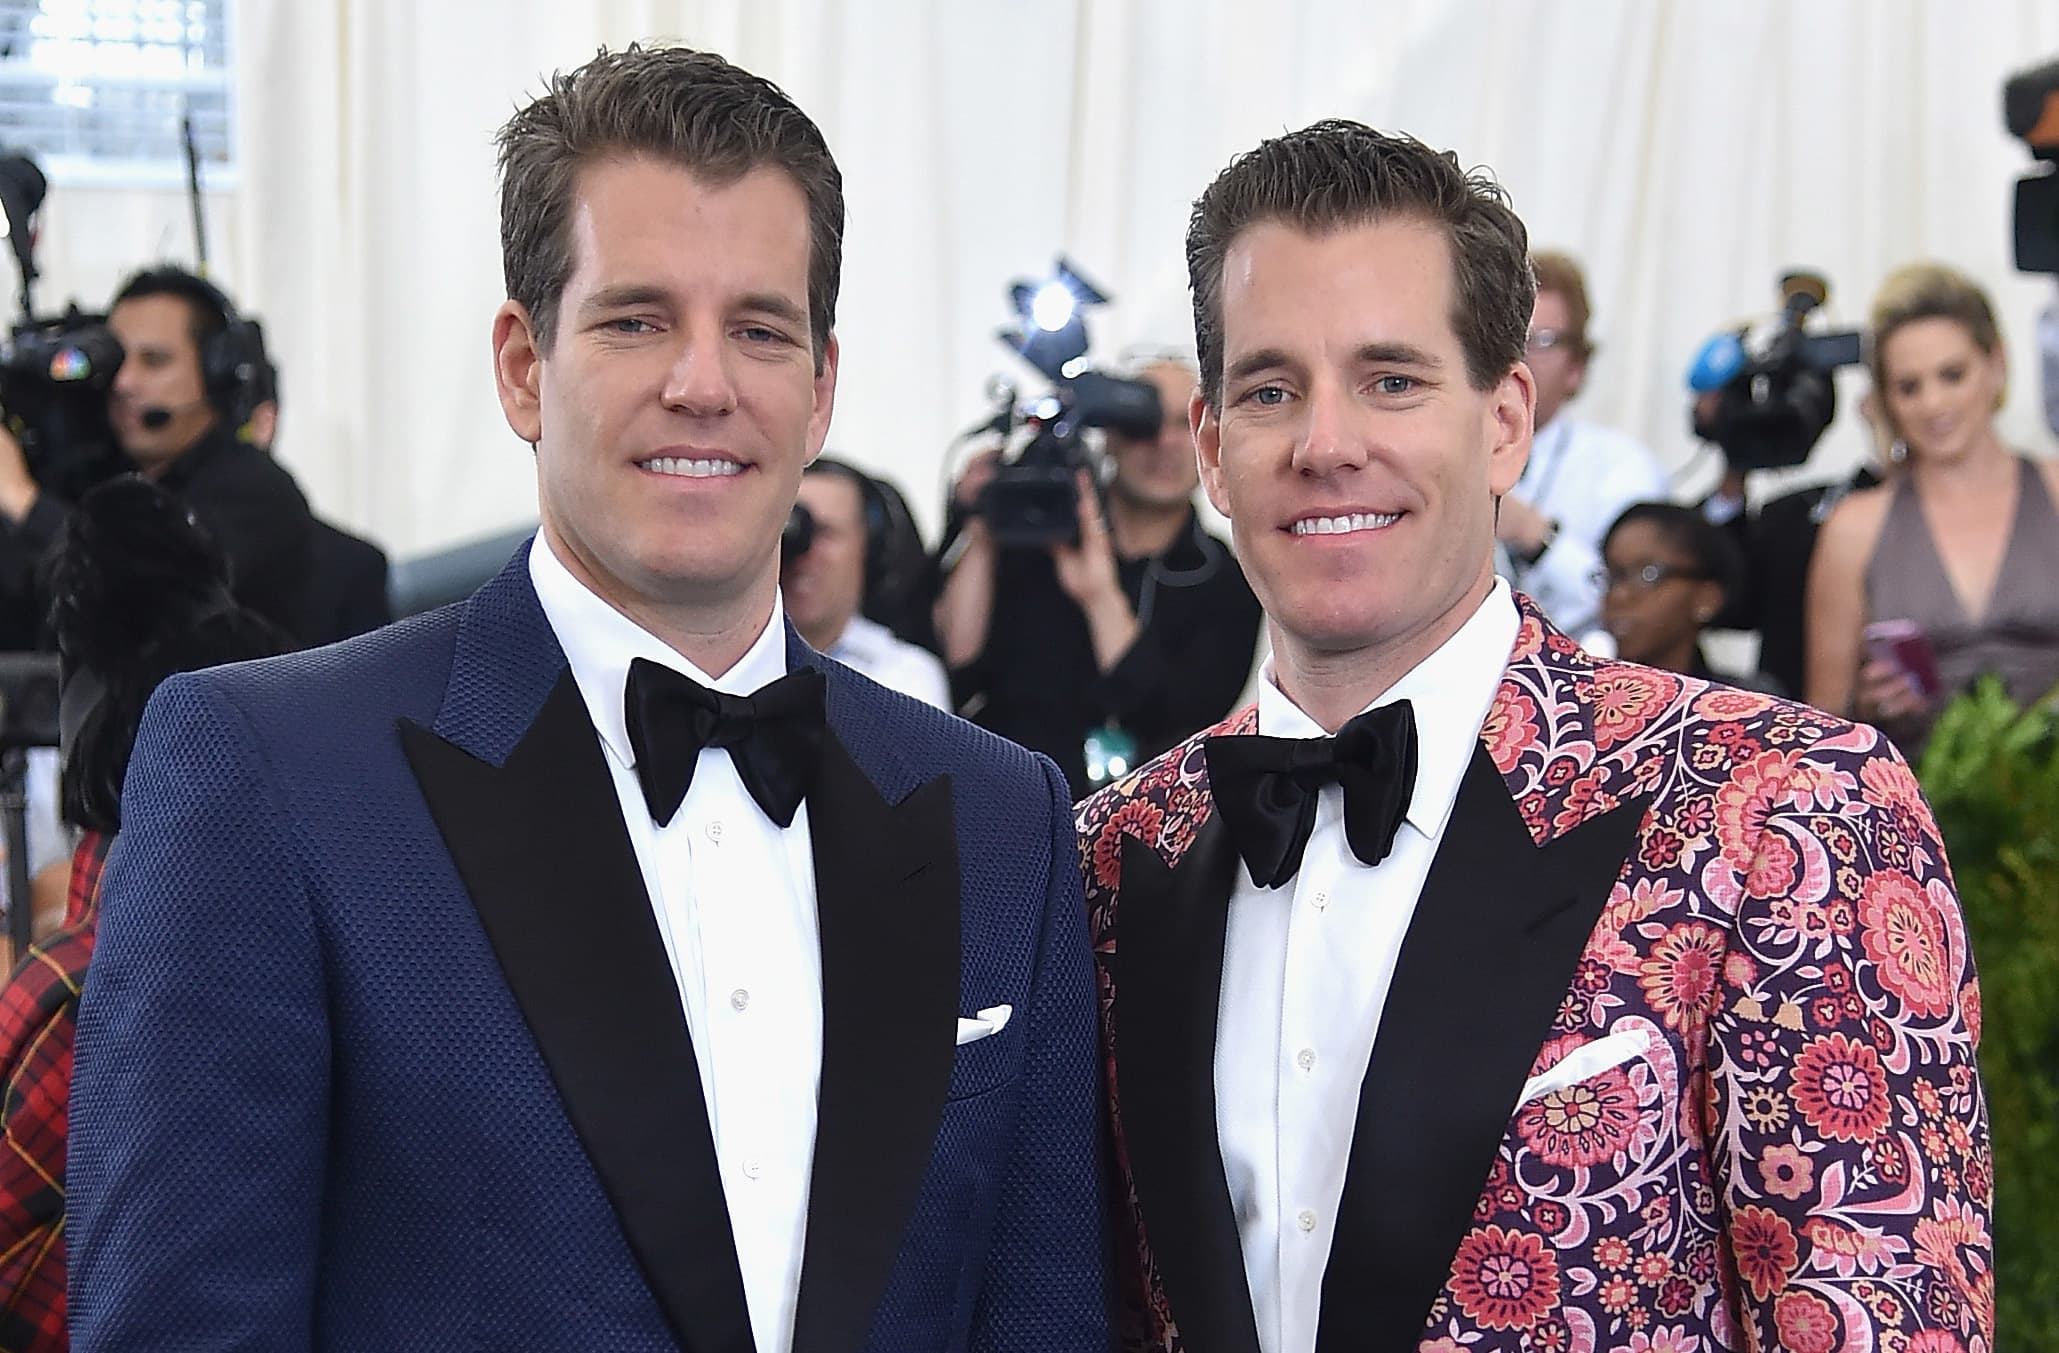 Winklevoss Twins May Have Be!   come First Bitcoin Billionaires - 